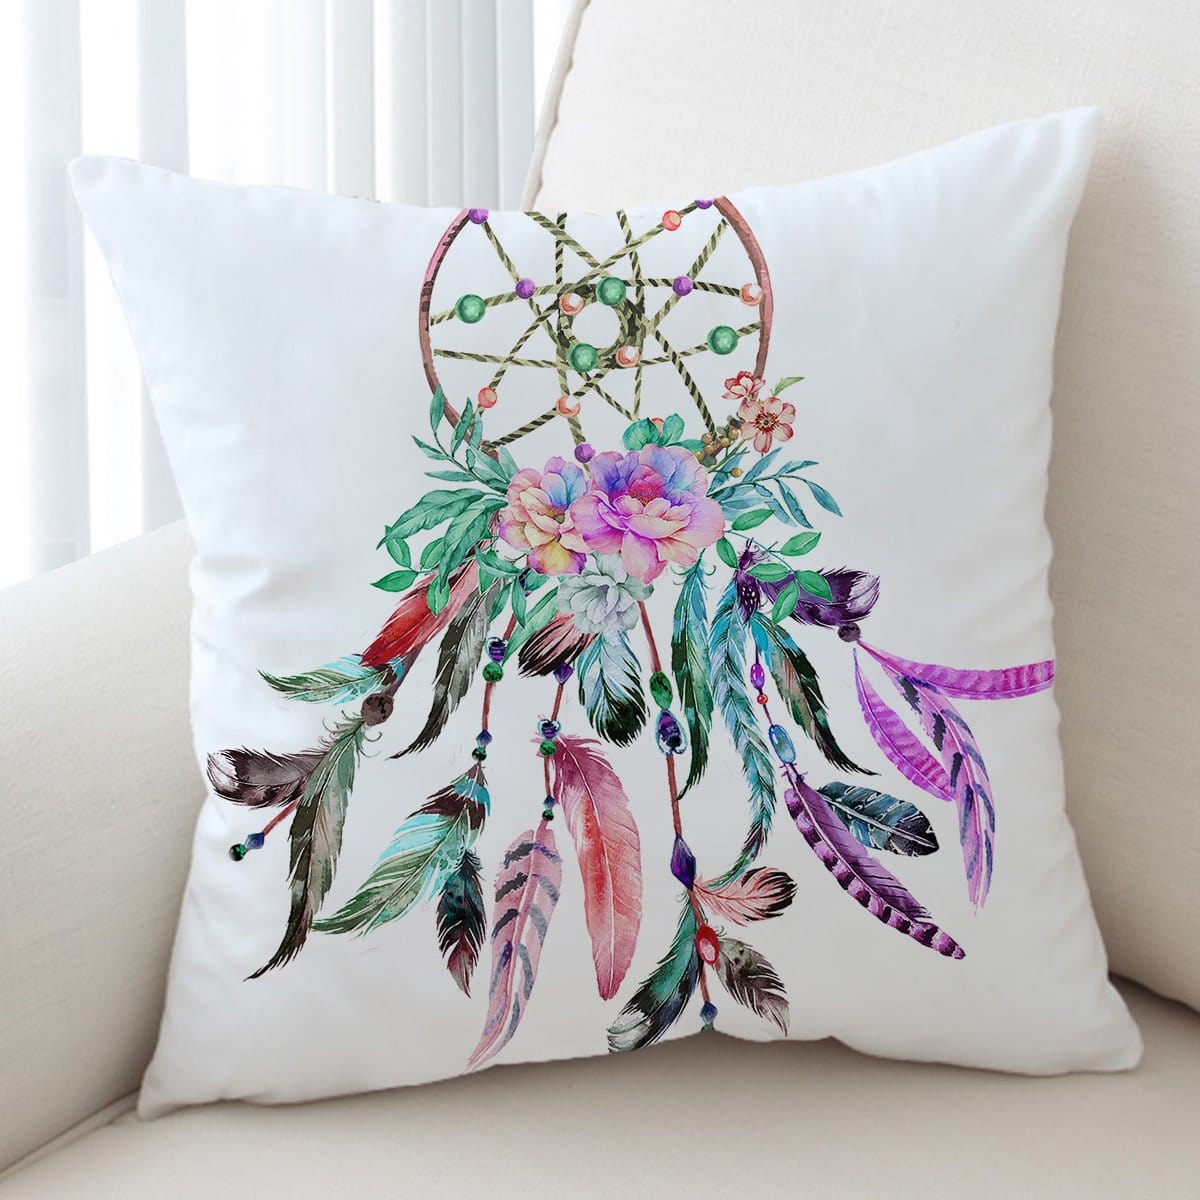 Bohemian Dreamcatcher Bohemian Dreamcatcher Cushion Cover